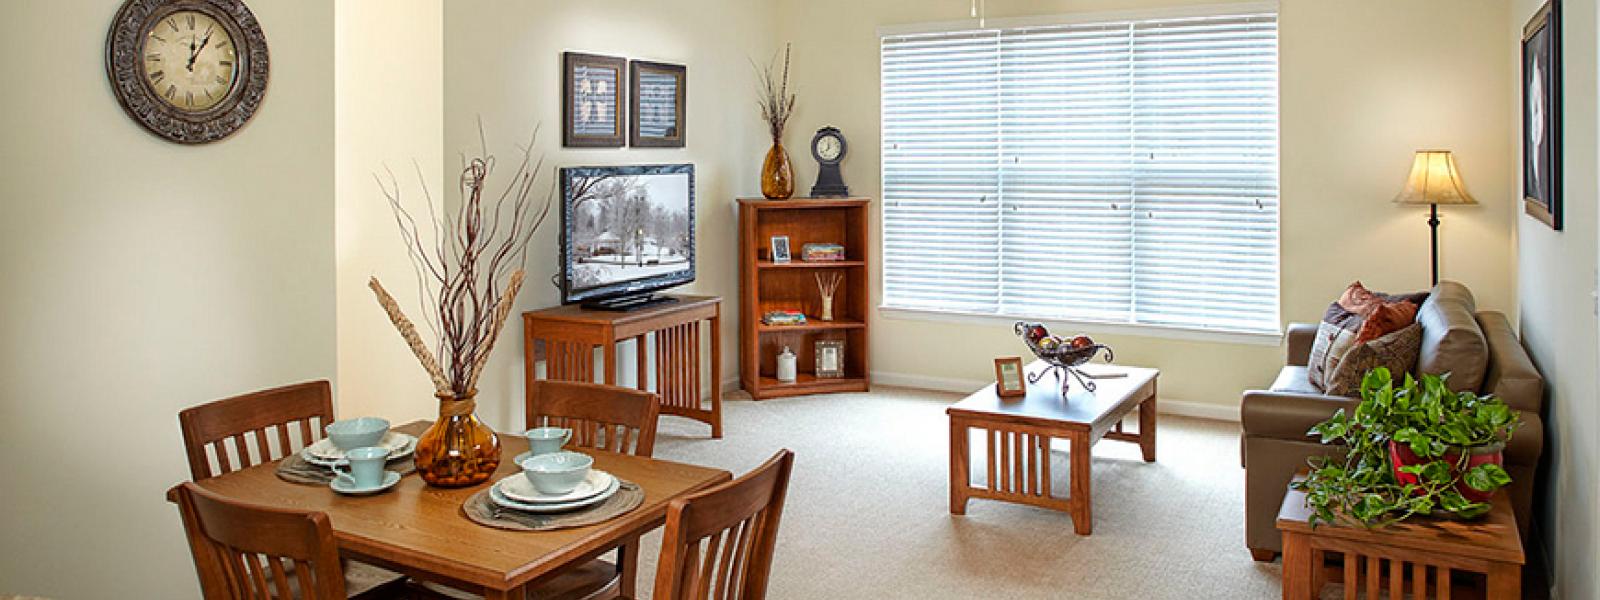 A photo of the living room and dining room at Pine View apartments on the campus of CIU.